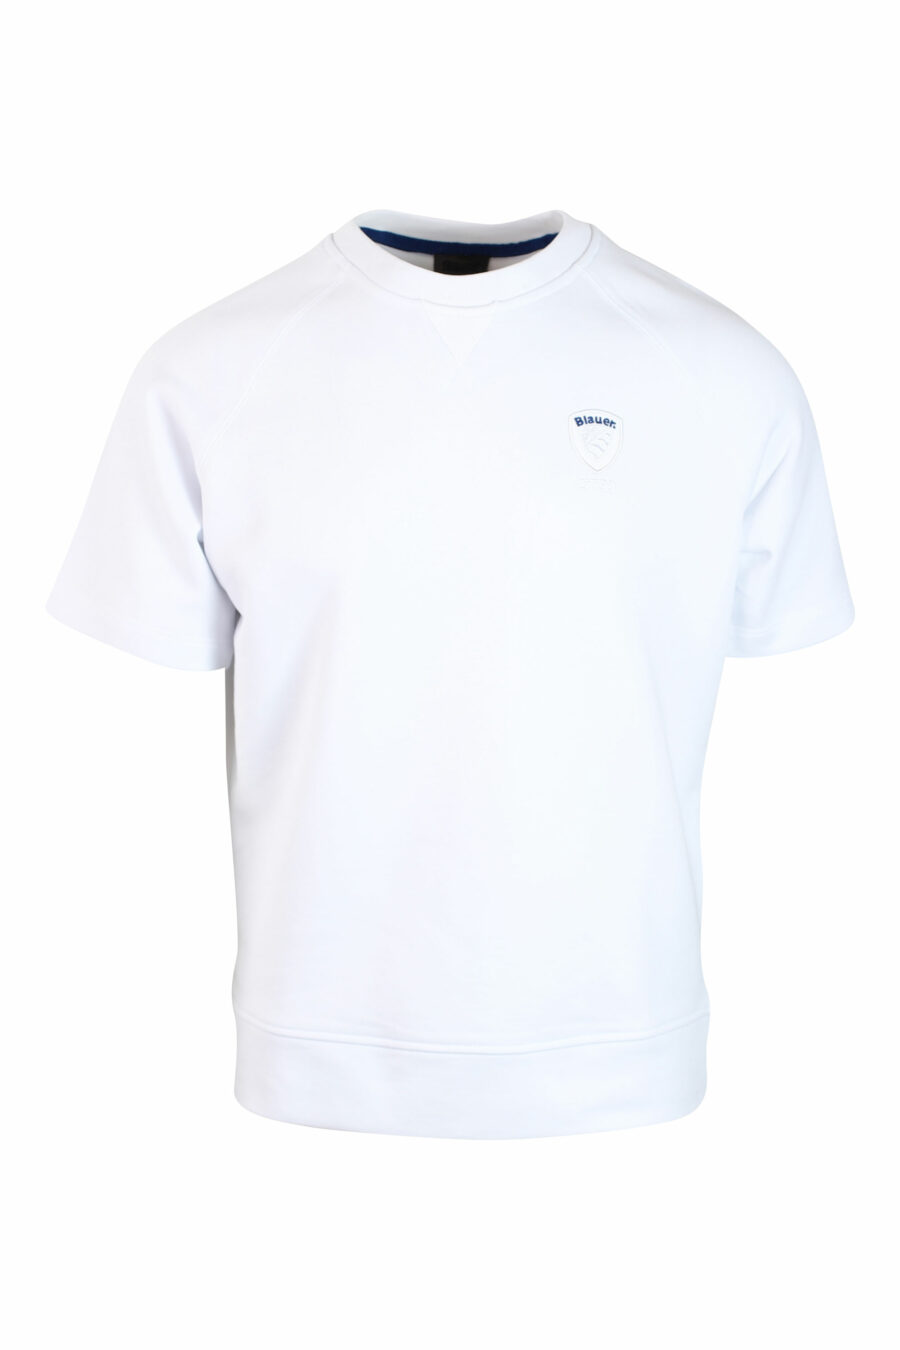 White T-shirt with embroidered monochrome mini-logo shield - IMG 0125